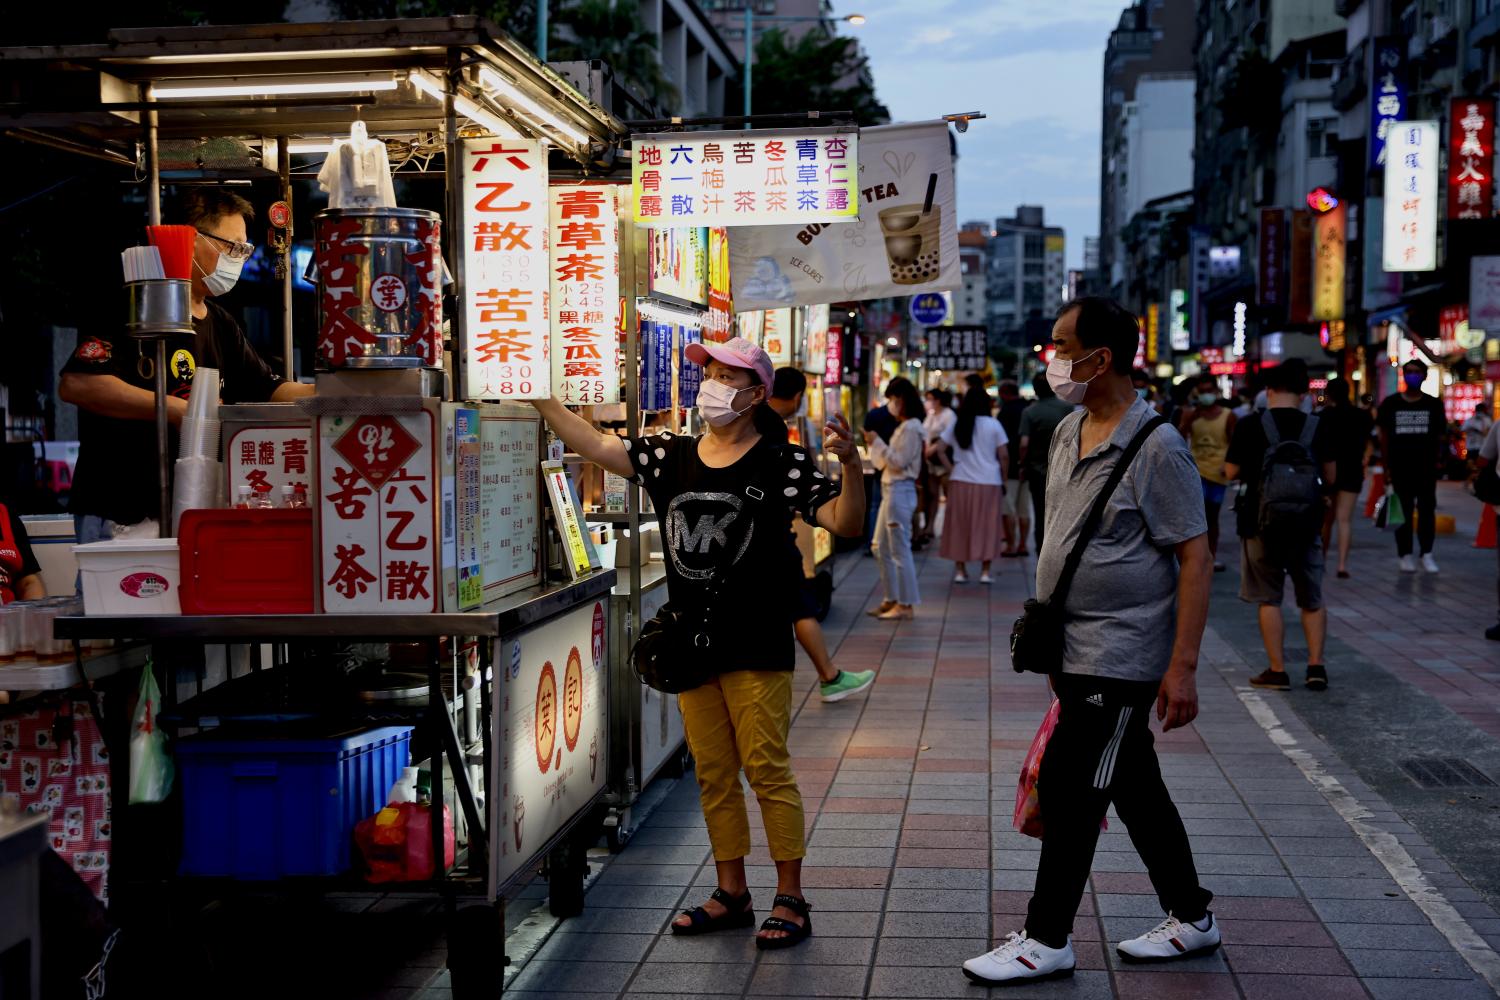 People wearing protective masks pick up their food at a newly opened night market amid the coronavirus disease (COVID-19) pandemic in Taipei, Taiwan, July 2, 2021. REUTERS/Ann Wang